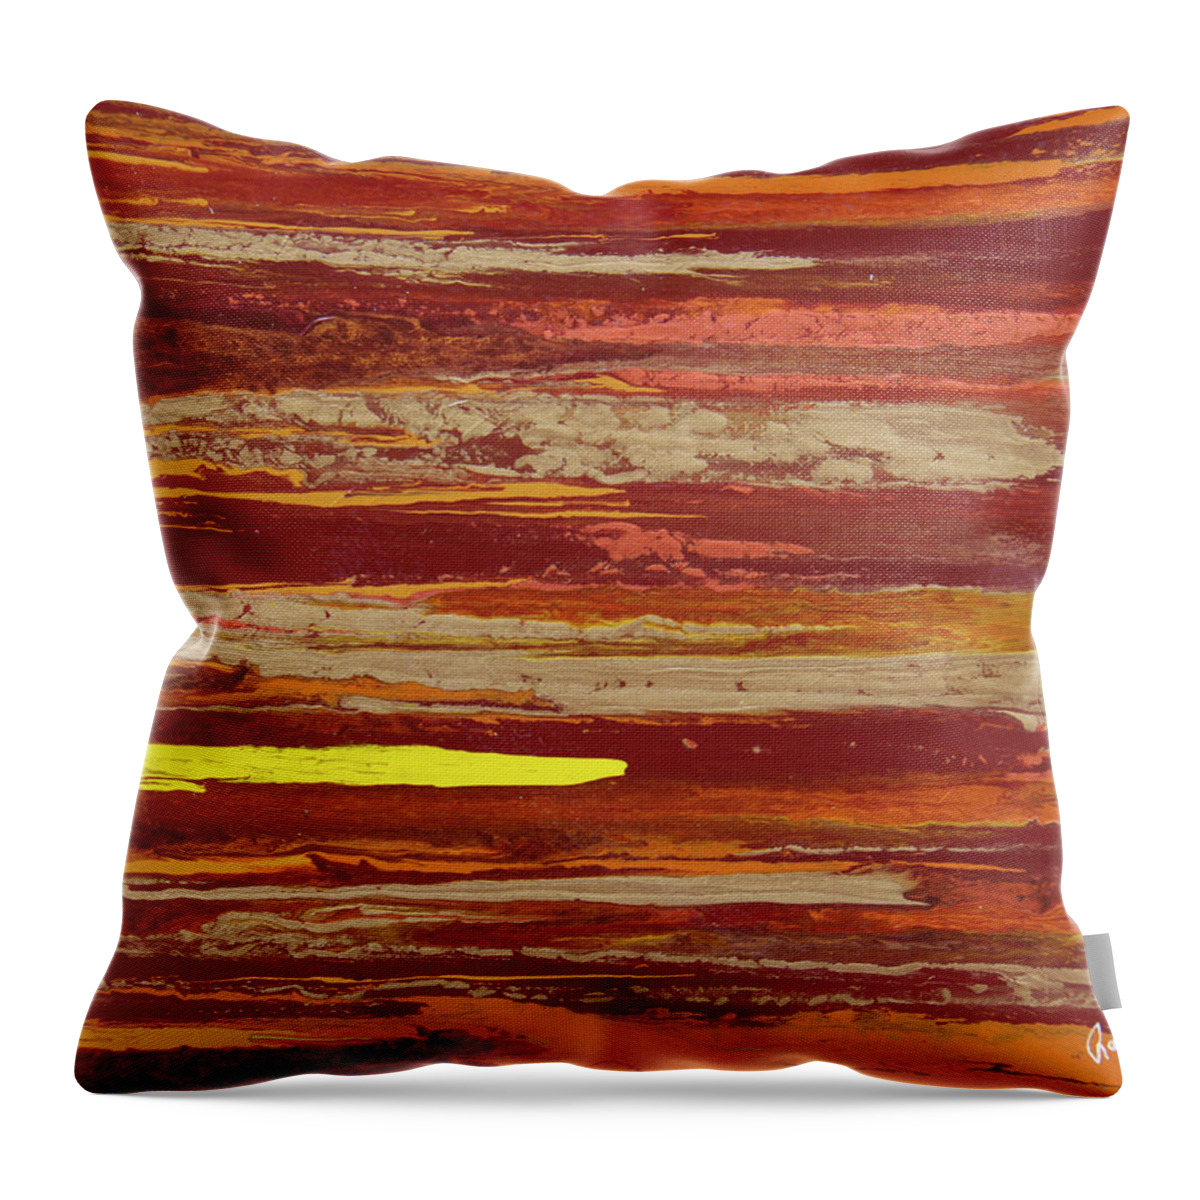 Fusionart Throw Pillow featuring the painting Ozone by Ralph White